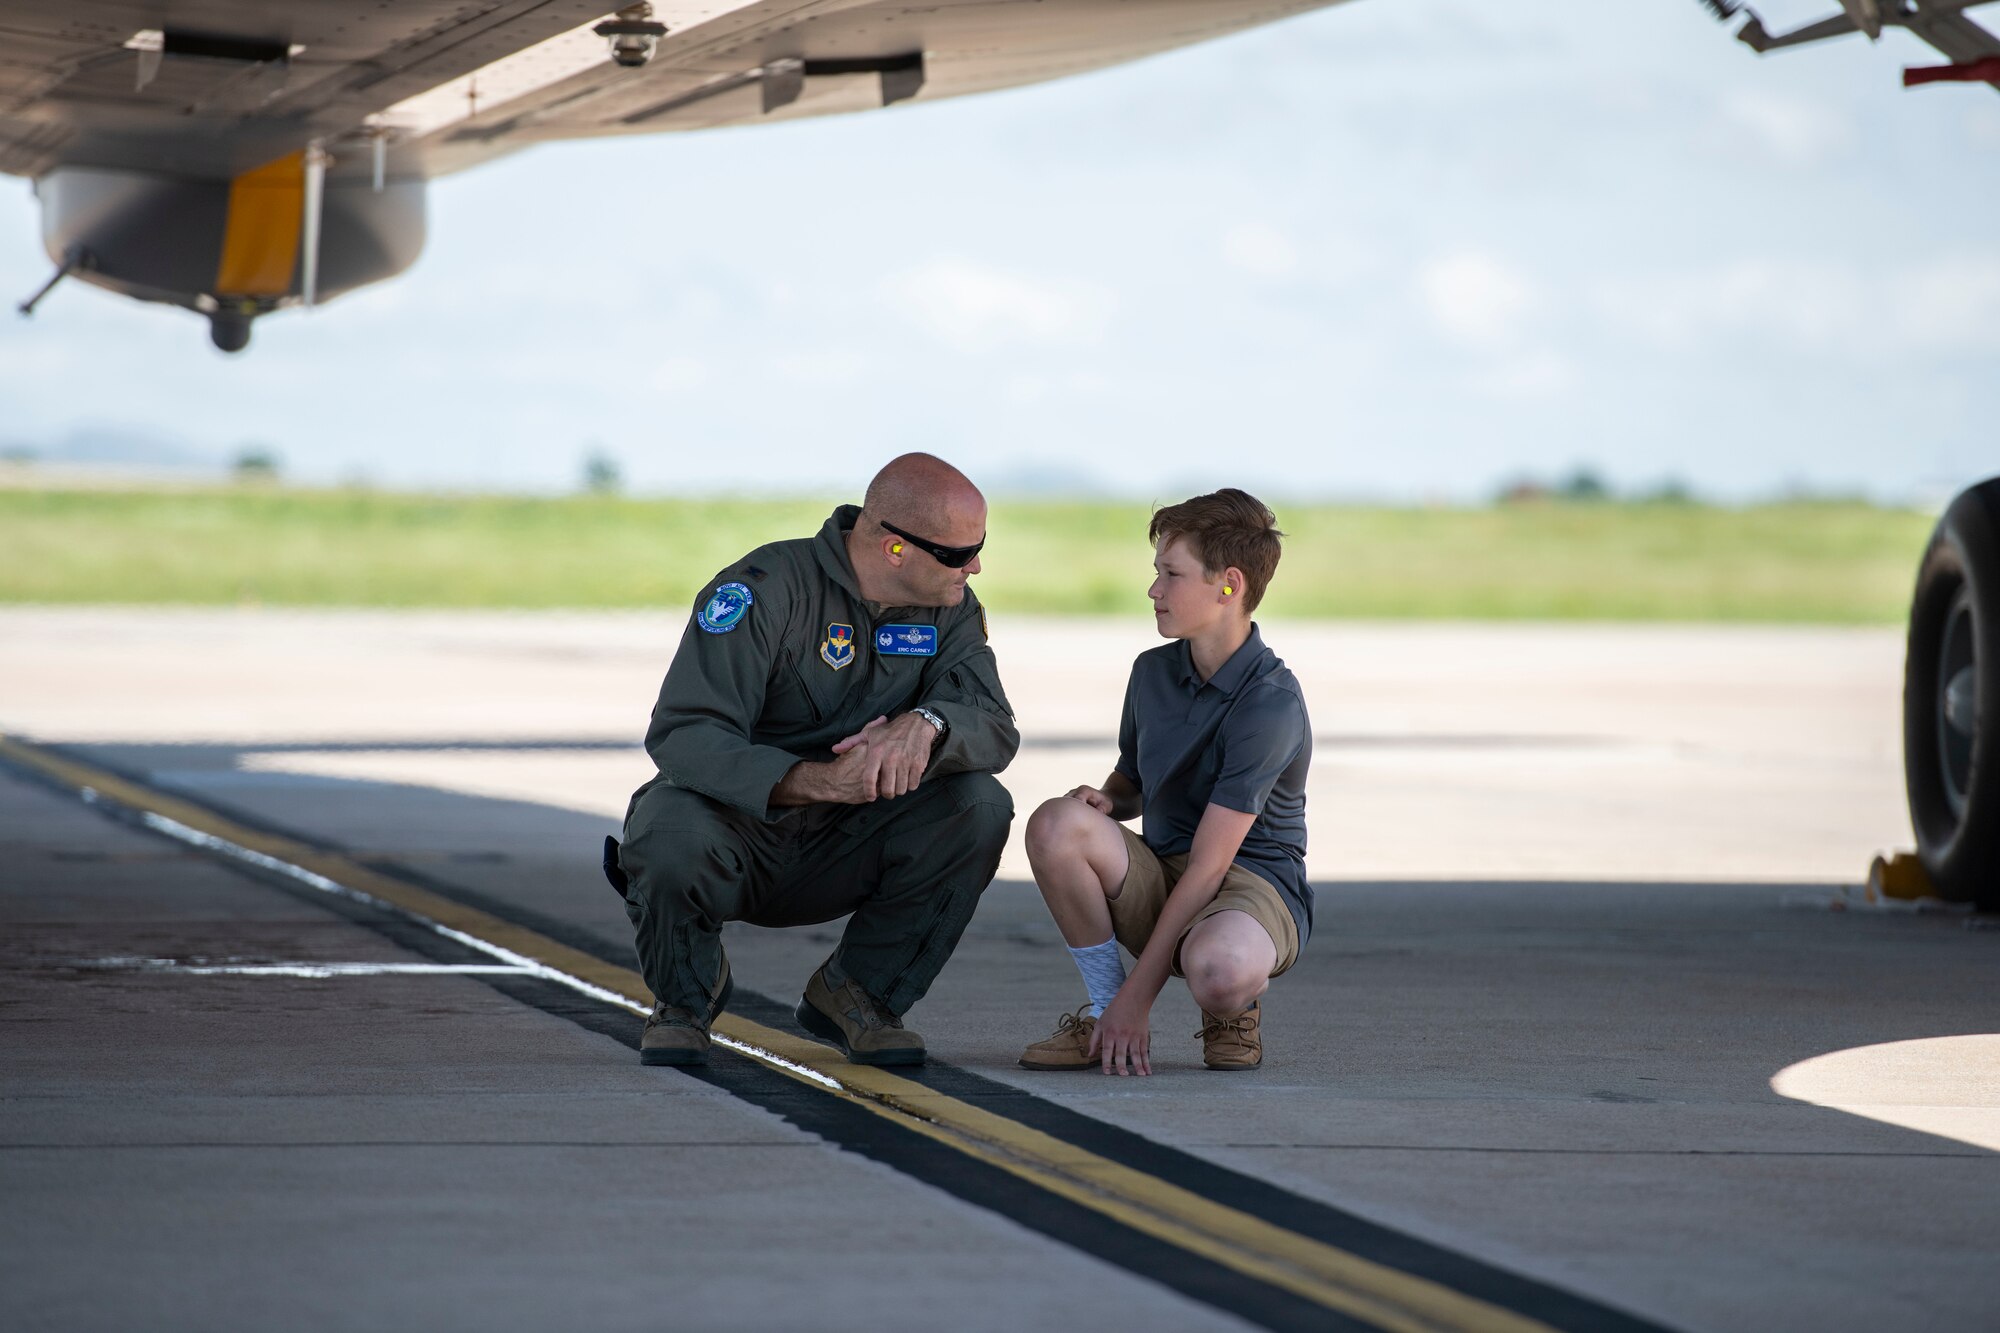 U.S. Air Force Col. Eric Carney, 97th Air Mobility Wing Commander, and his son sit under one of the newly arrived KC-46 Pegasus, May 18, 2019, at Altus Air Force Base, Okla. This new addition of aircraft will allow Altus AFB to continue its mission of training pilots and aircrew. (U.S. Air Force photo by Airman 1st Class Breanna Klemm)